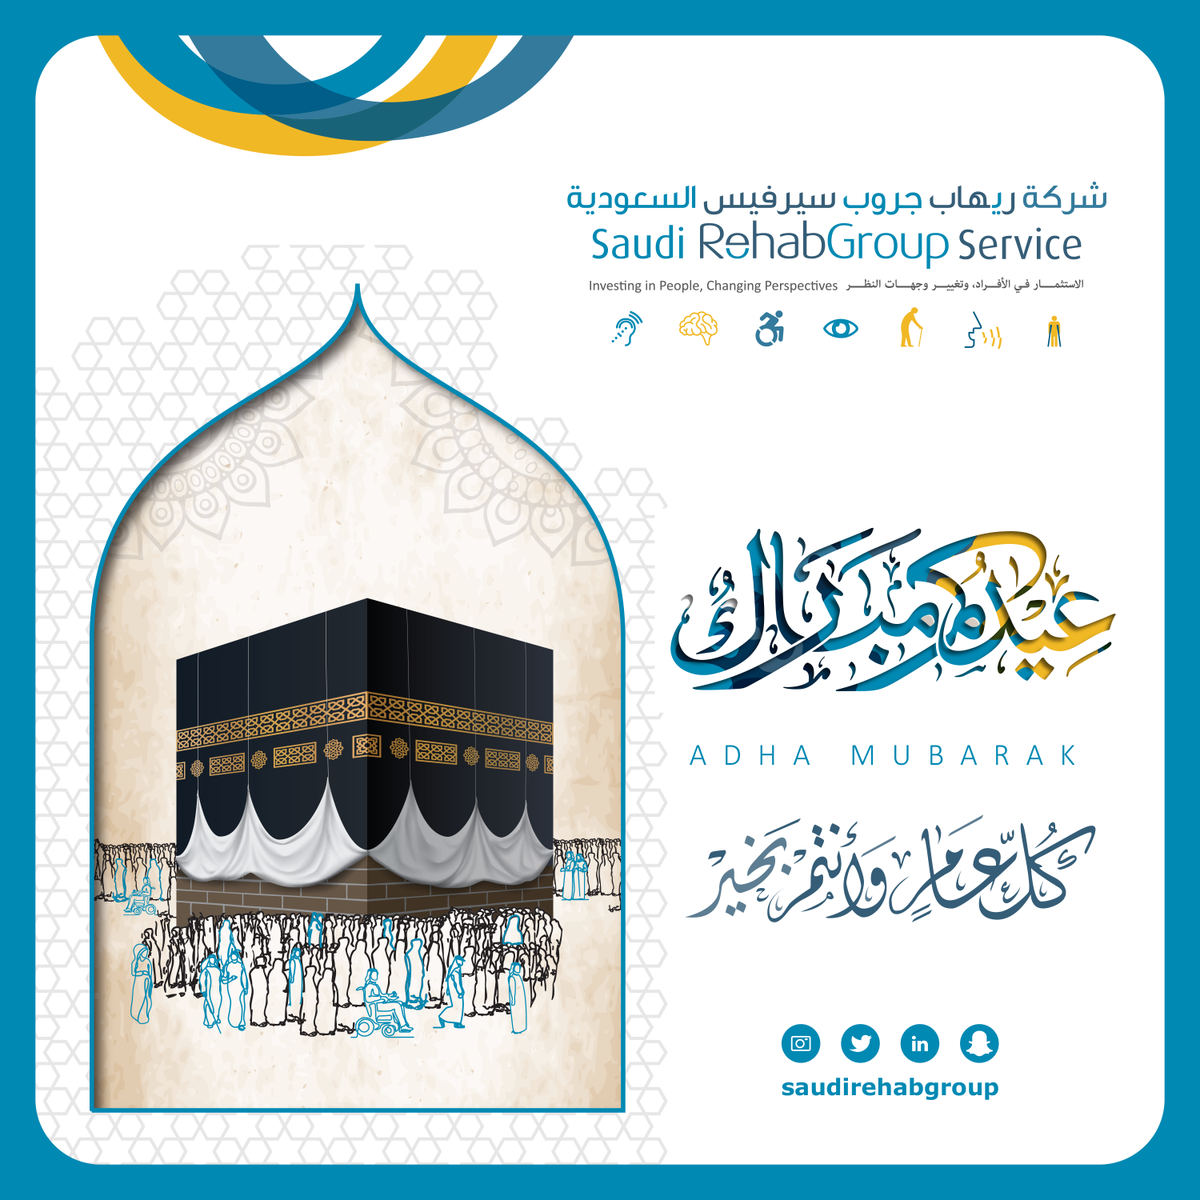 ✨We wish staff, families and our clients a very happy and peaceful Eid.
#Adha_Mubarak from all our team in @SaudiRehabGroup 🌙🕋🤲